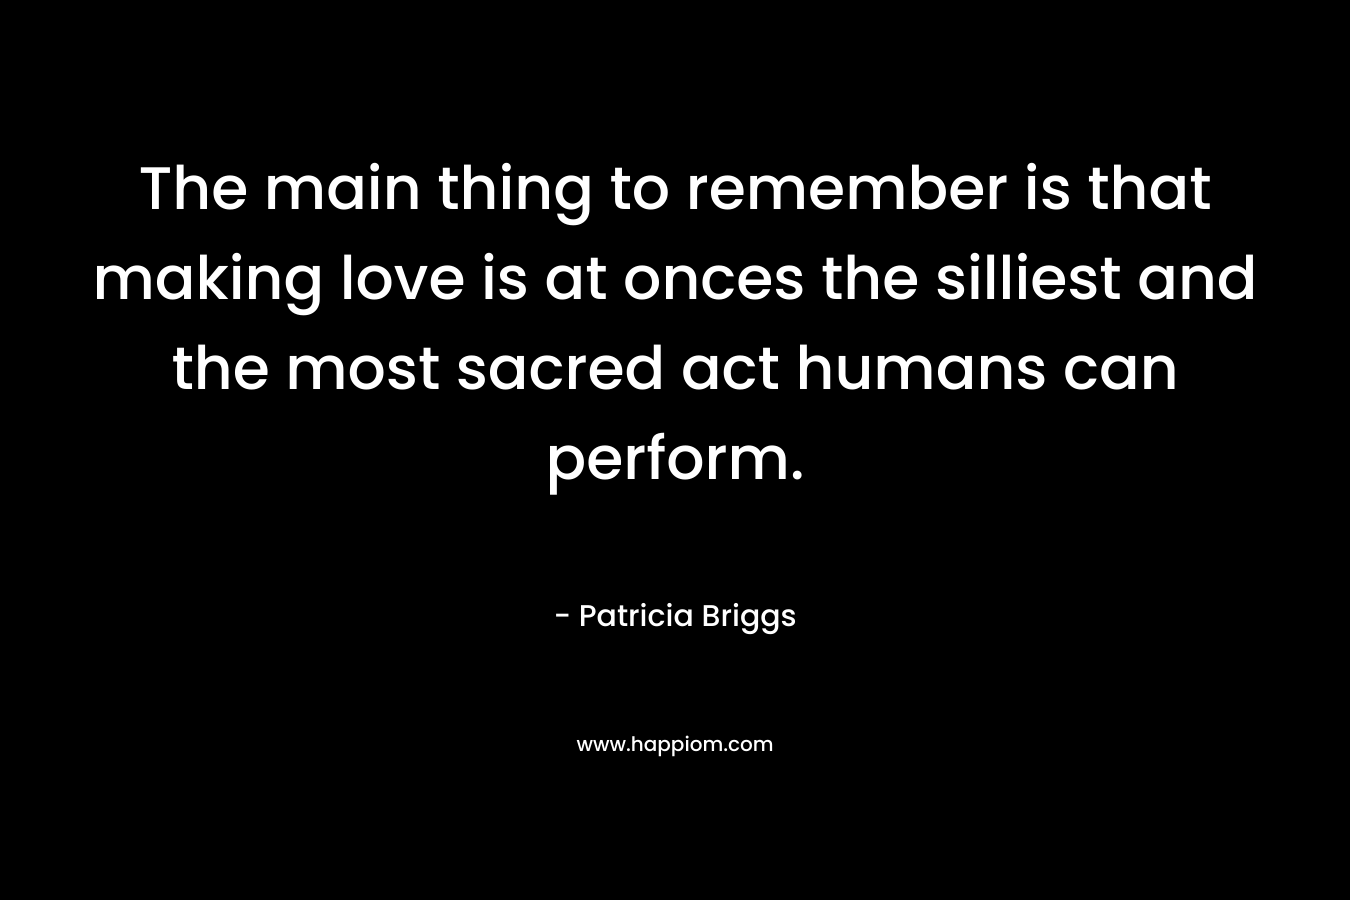 The main thing to remember is that making love is at onces the silliest and the most sacred act humans can perform.